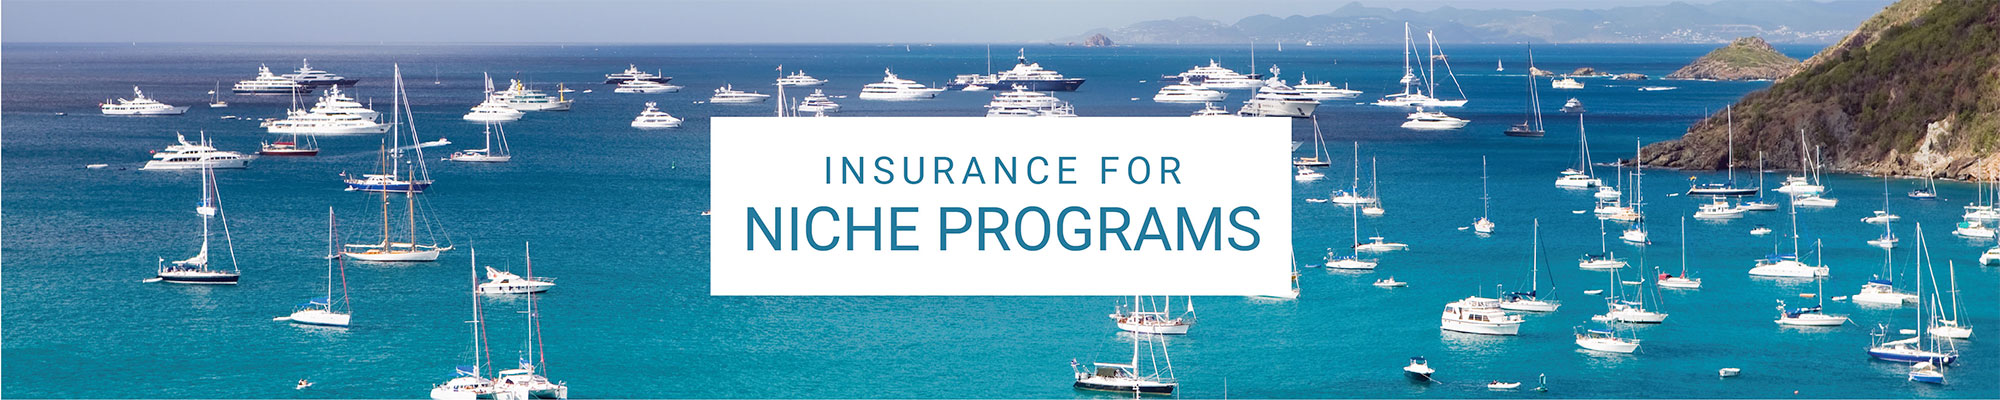 photo of harbor with ships with text 'Insurance for Niche Programs'